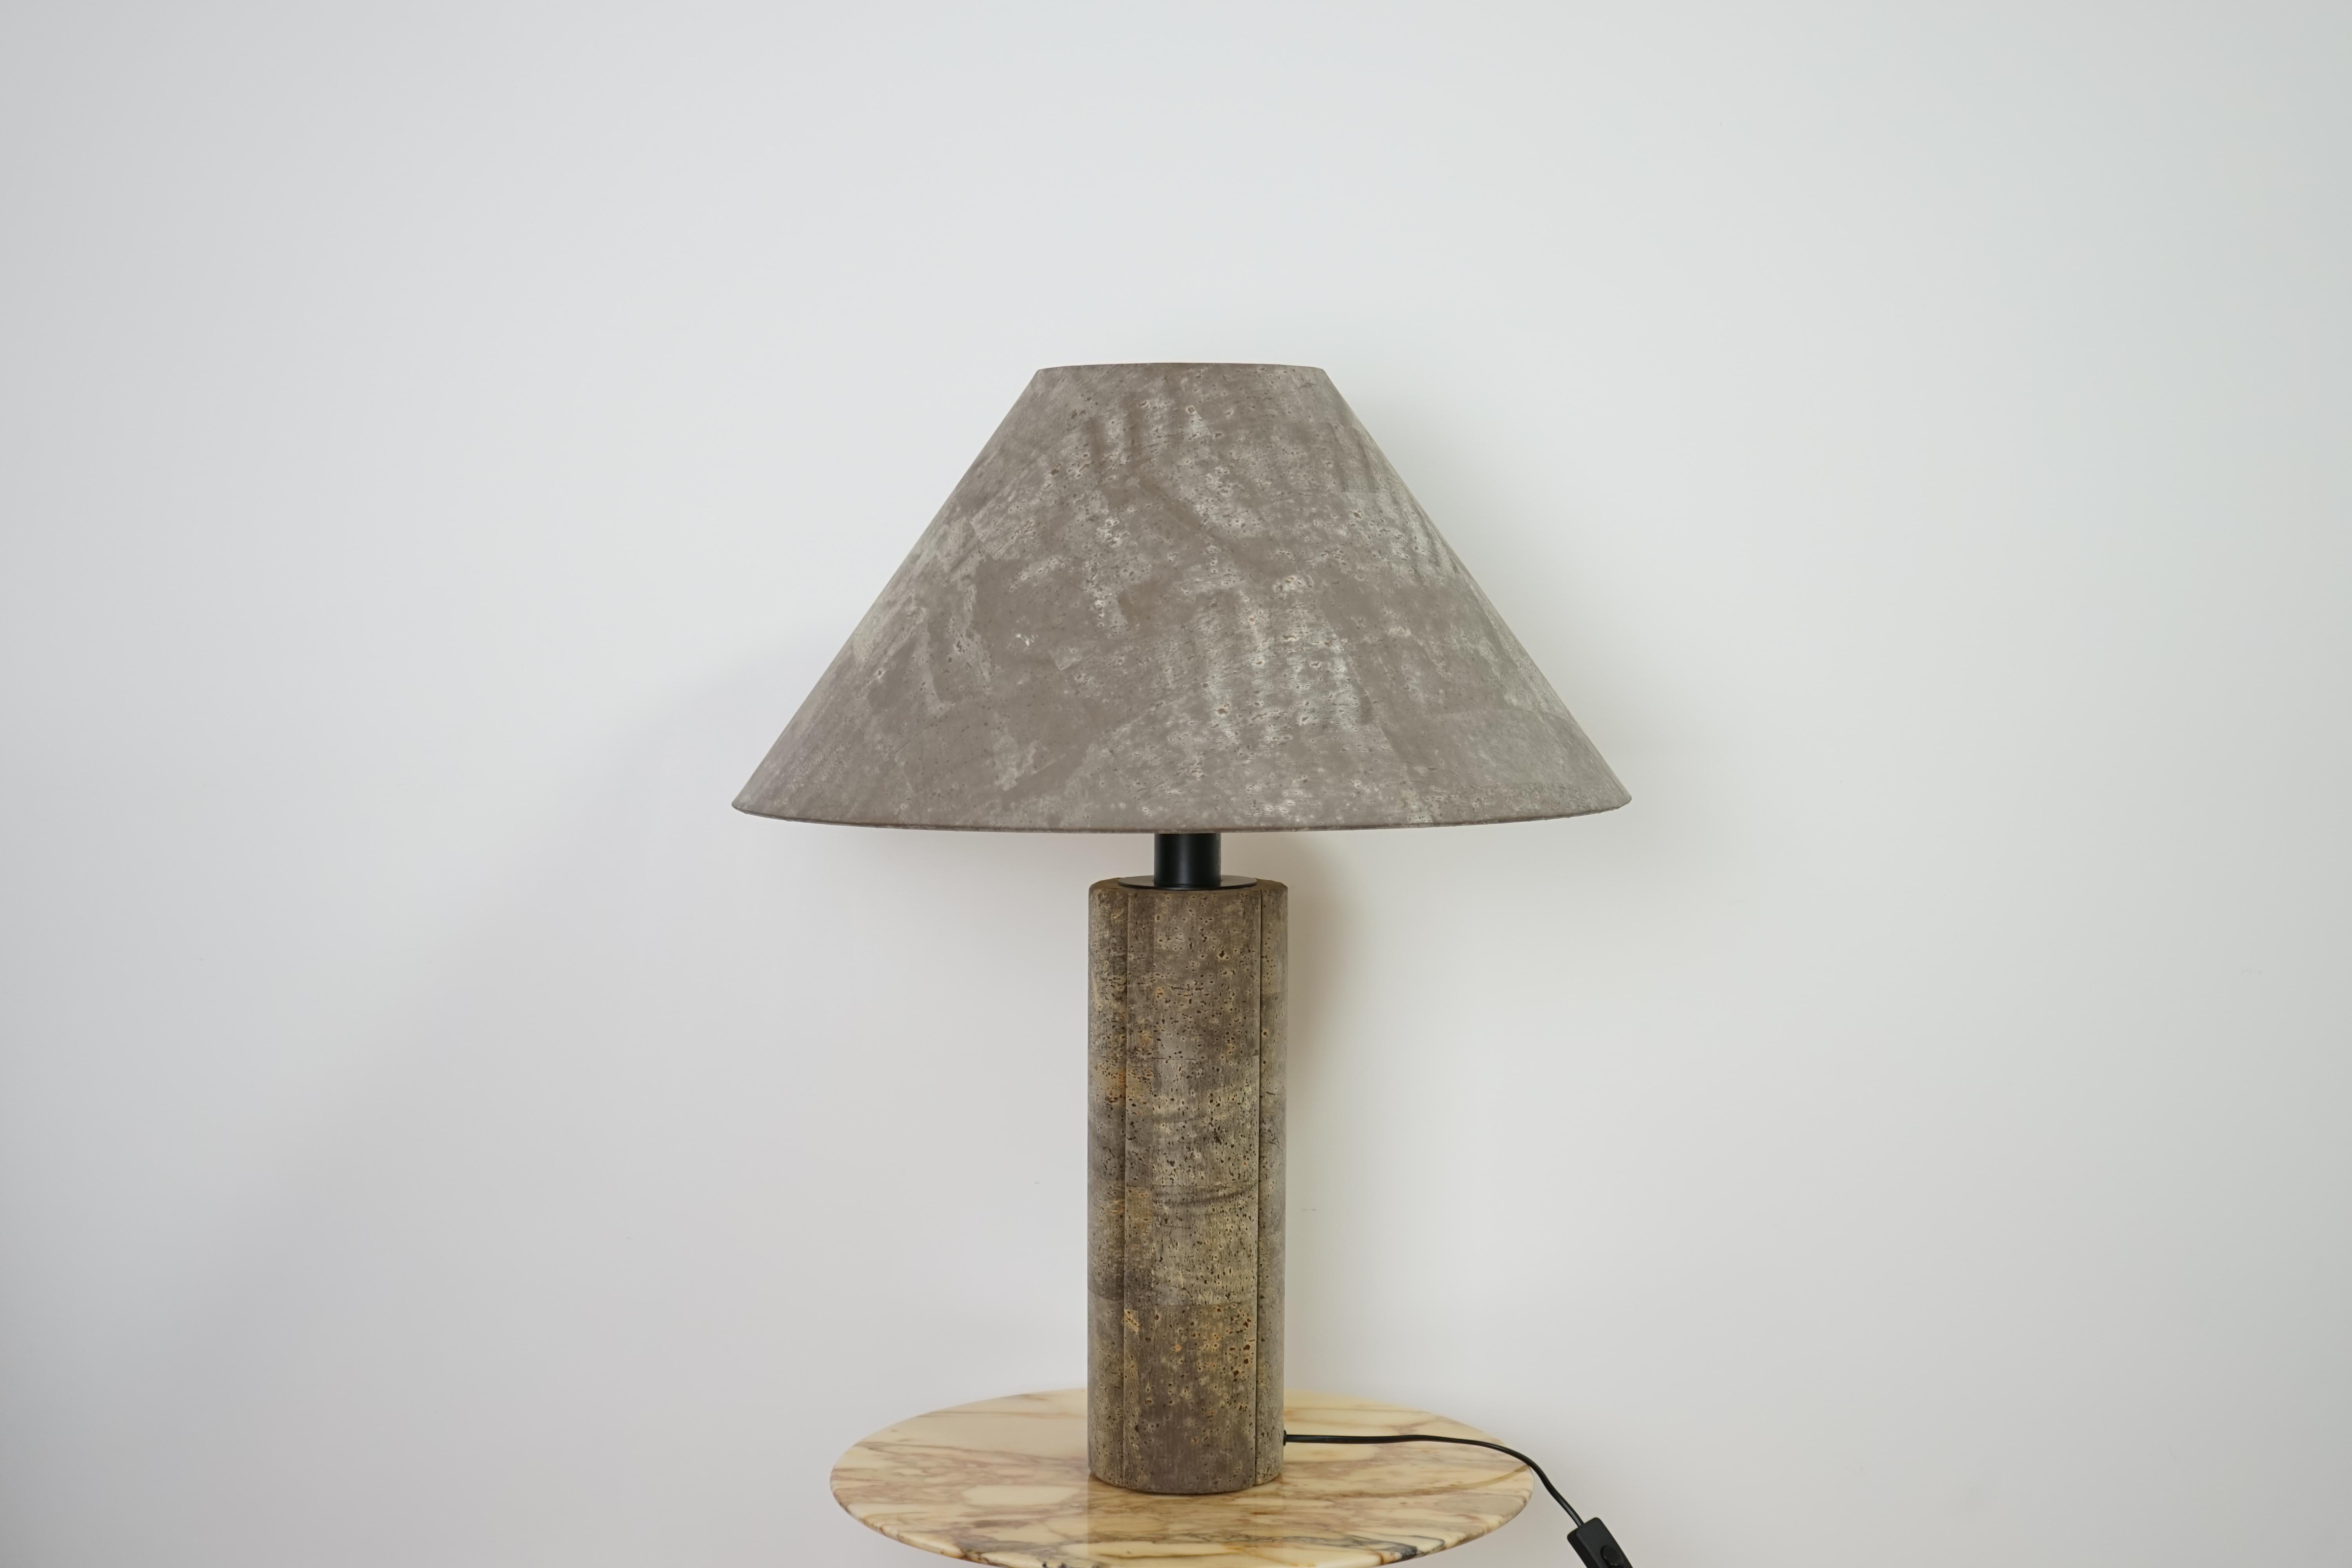 Large Table Lamp in Cork by Ingo Maurer for Design M in Germany from the 1970s.